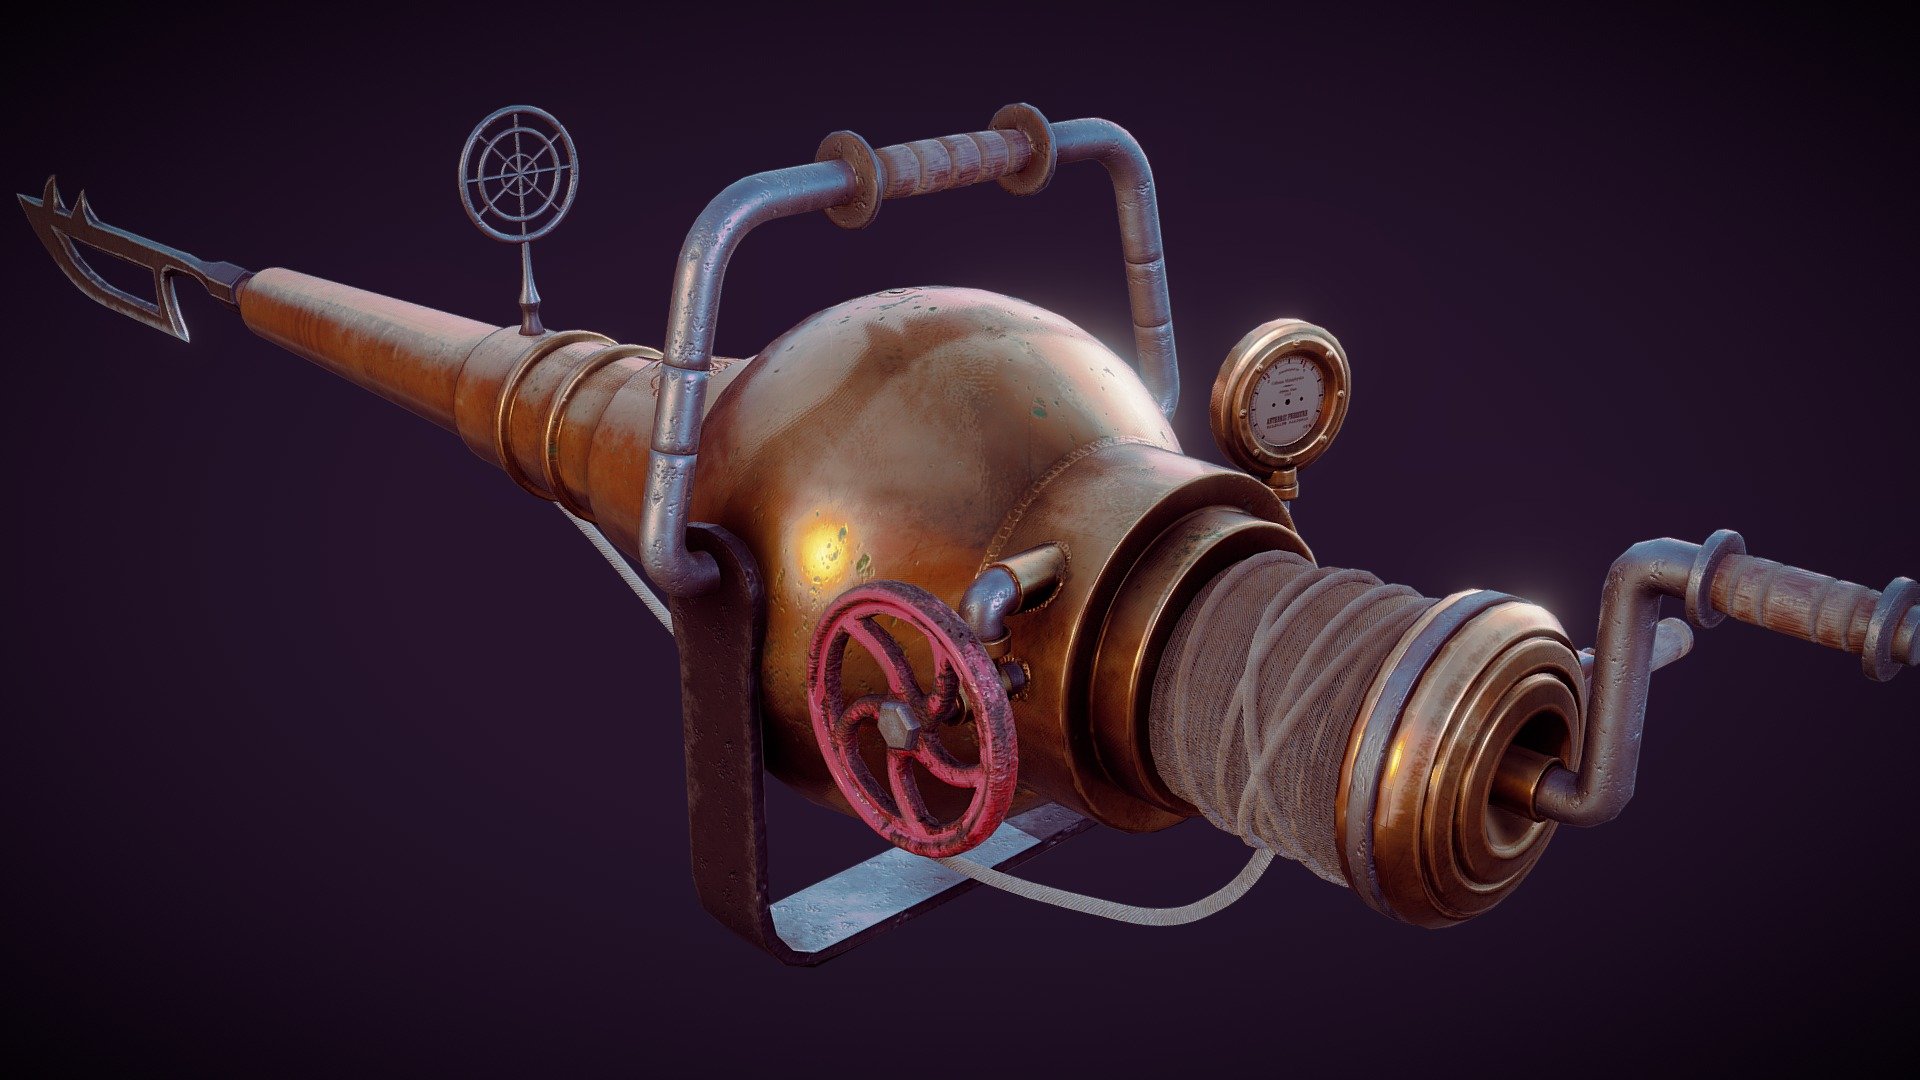 A Harpoon Launcher with some steam-punk influence!.

Tools:
-3dsmax
-substance painter 2019
-photoshop
-Xnormal
-Mudbox - Ahab's Revenge - 3D model by Steven Janes (@Ebethrone) 3d model